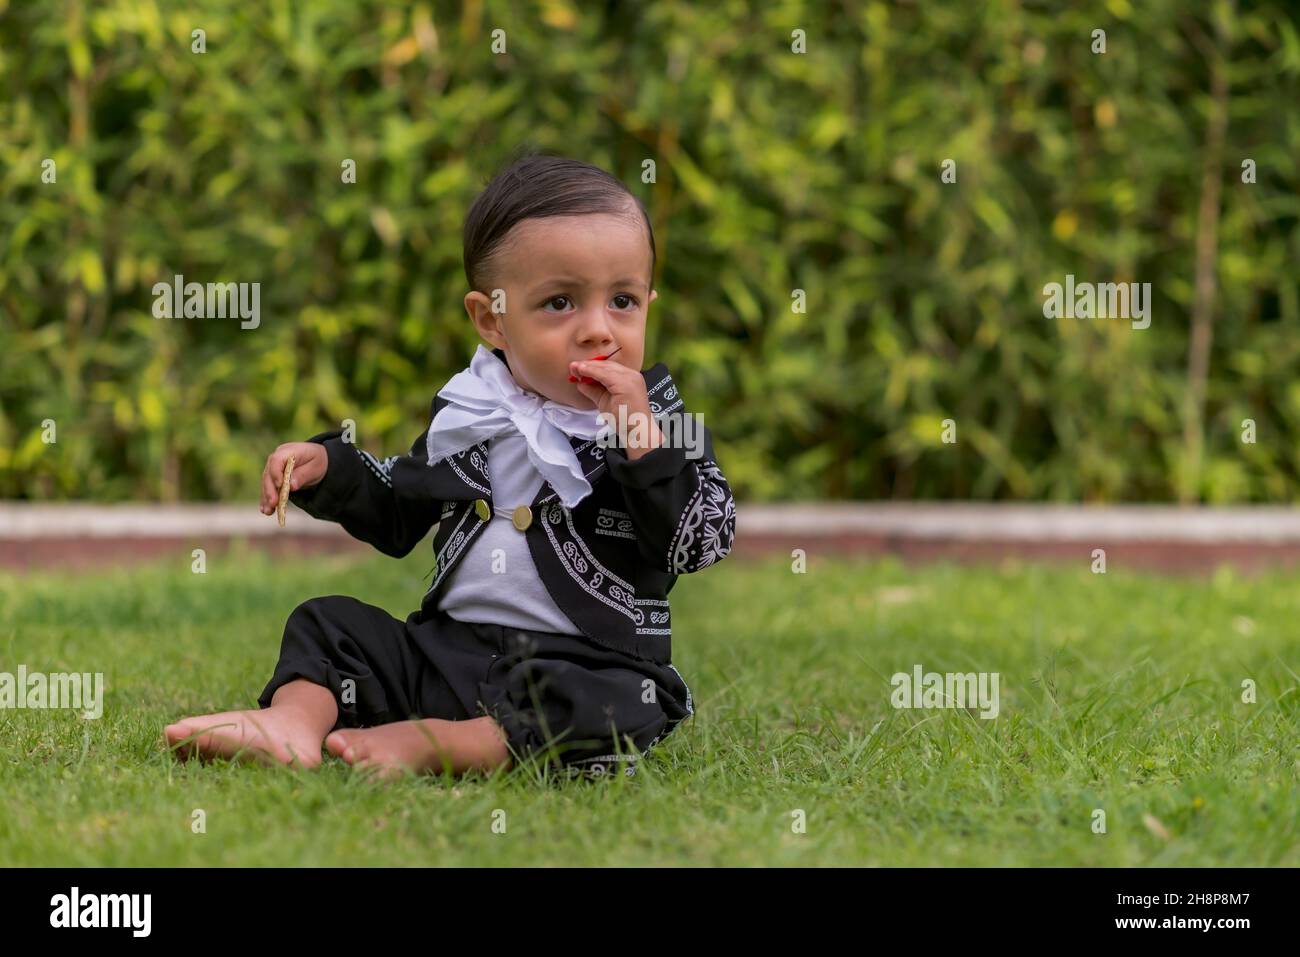 Latin baby boy with a mariachi costume playing with a red flower Stock Photo